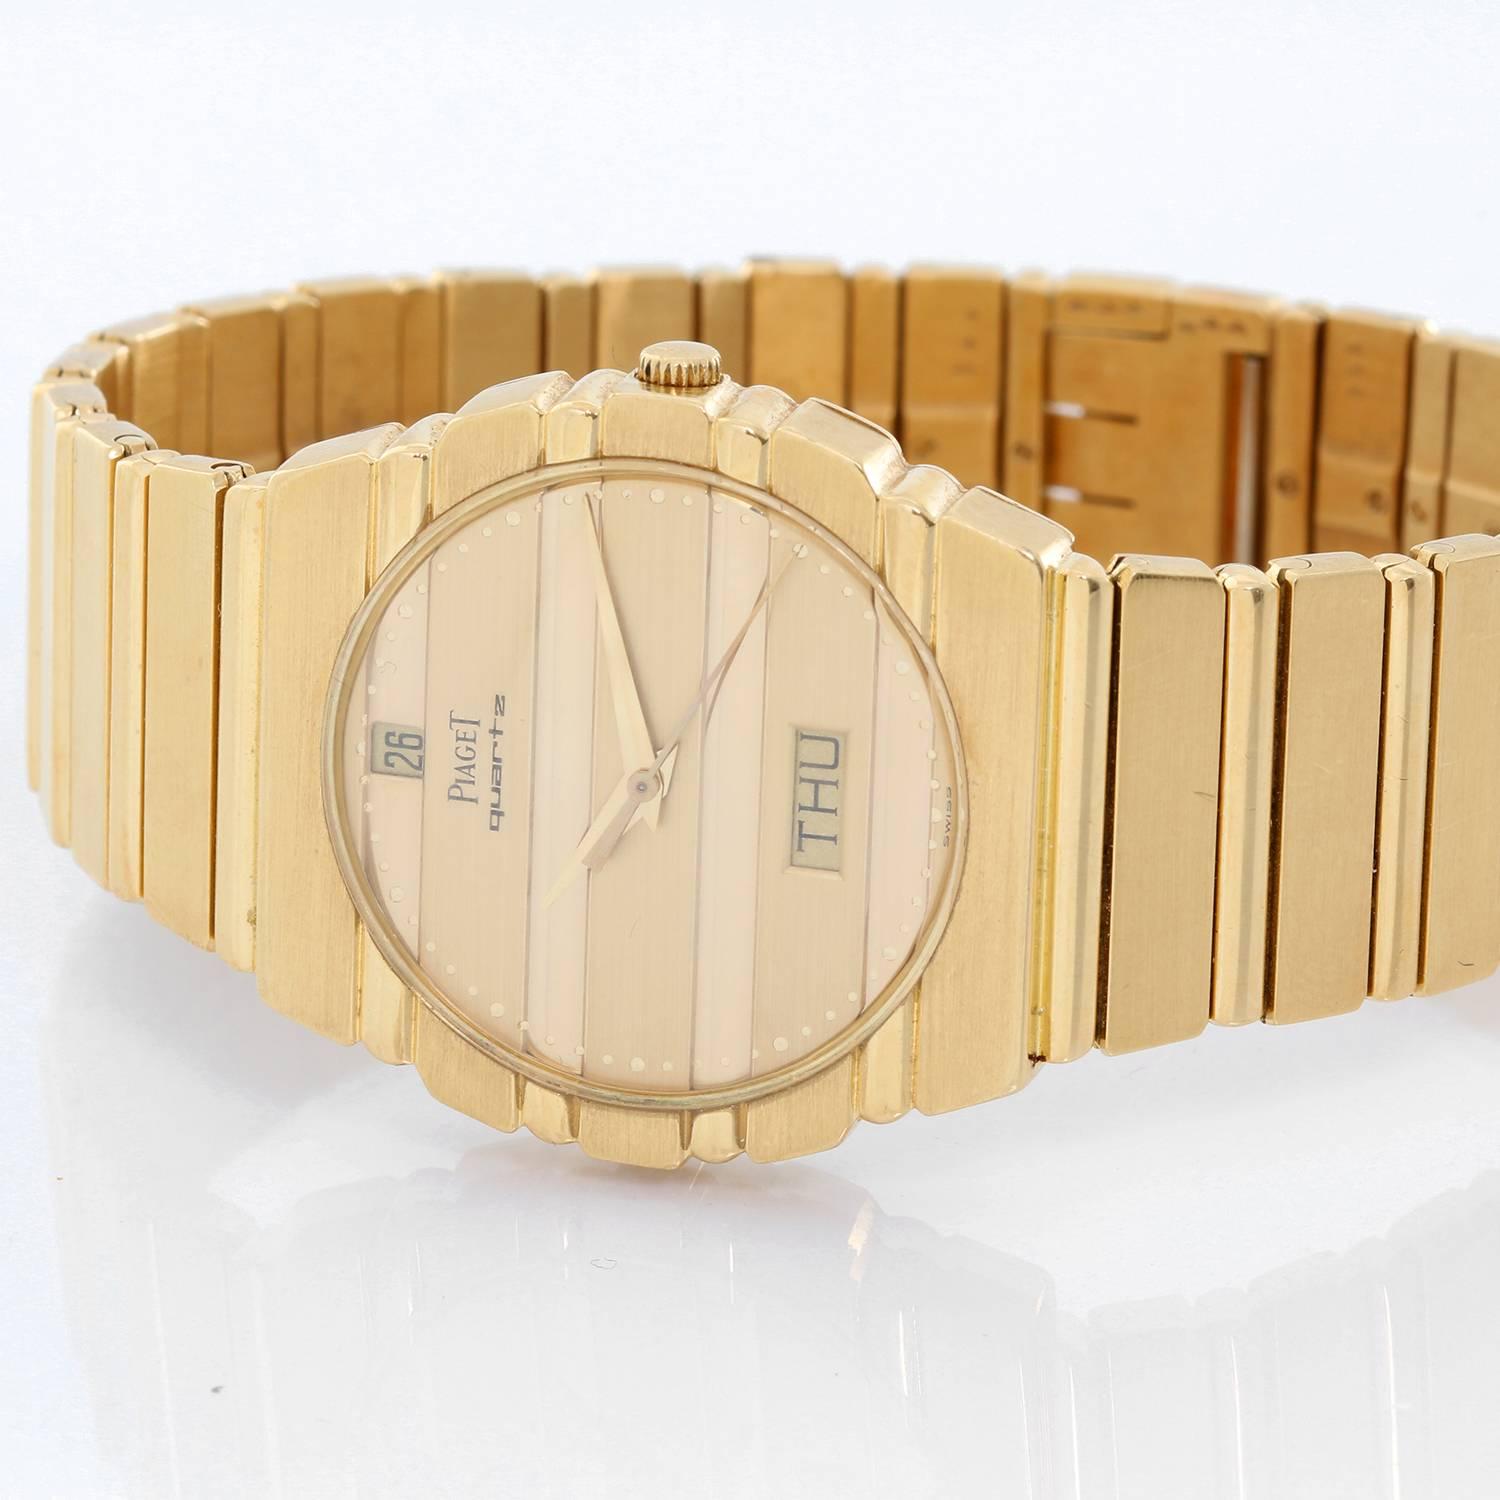 Piaget Polo Yellow Gold Watch with Day & Date 15562 C701 -  Quartz. 18K Yellow gold ( 31 mm ). Gold dial with day and date. 18K Yellow Gold Bracelet. Pre-owned with box. Inscription on back JLW & CO. 1957-1982.